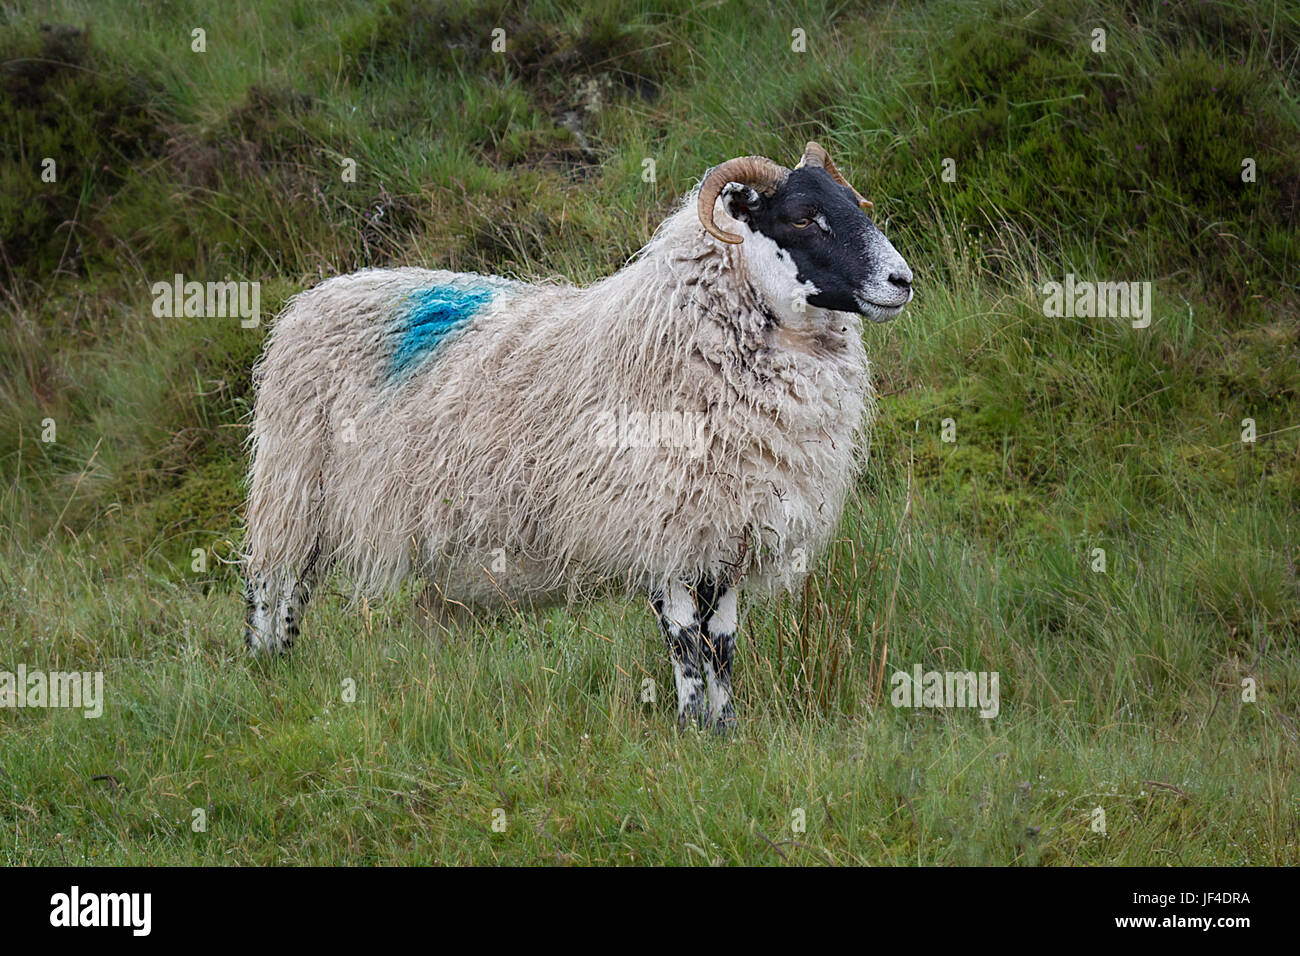 A  profile close up photograph of a sheep with a shaggy fleece standing and posing Stock Photo